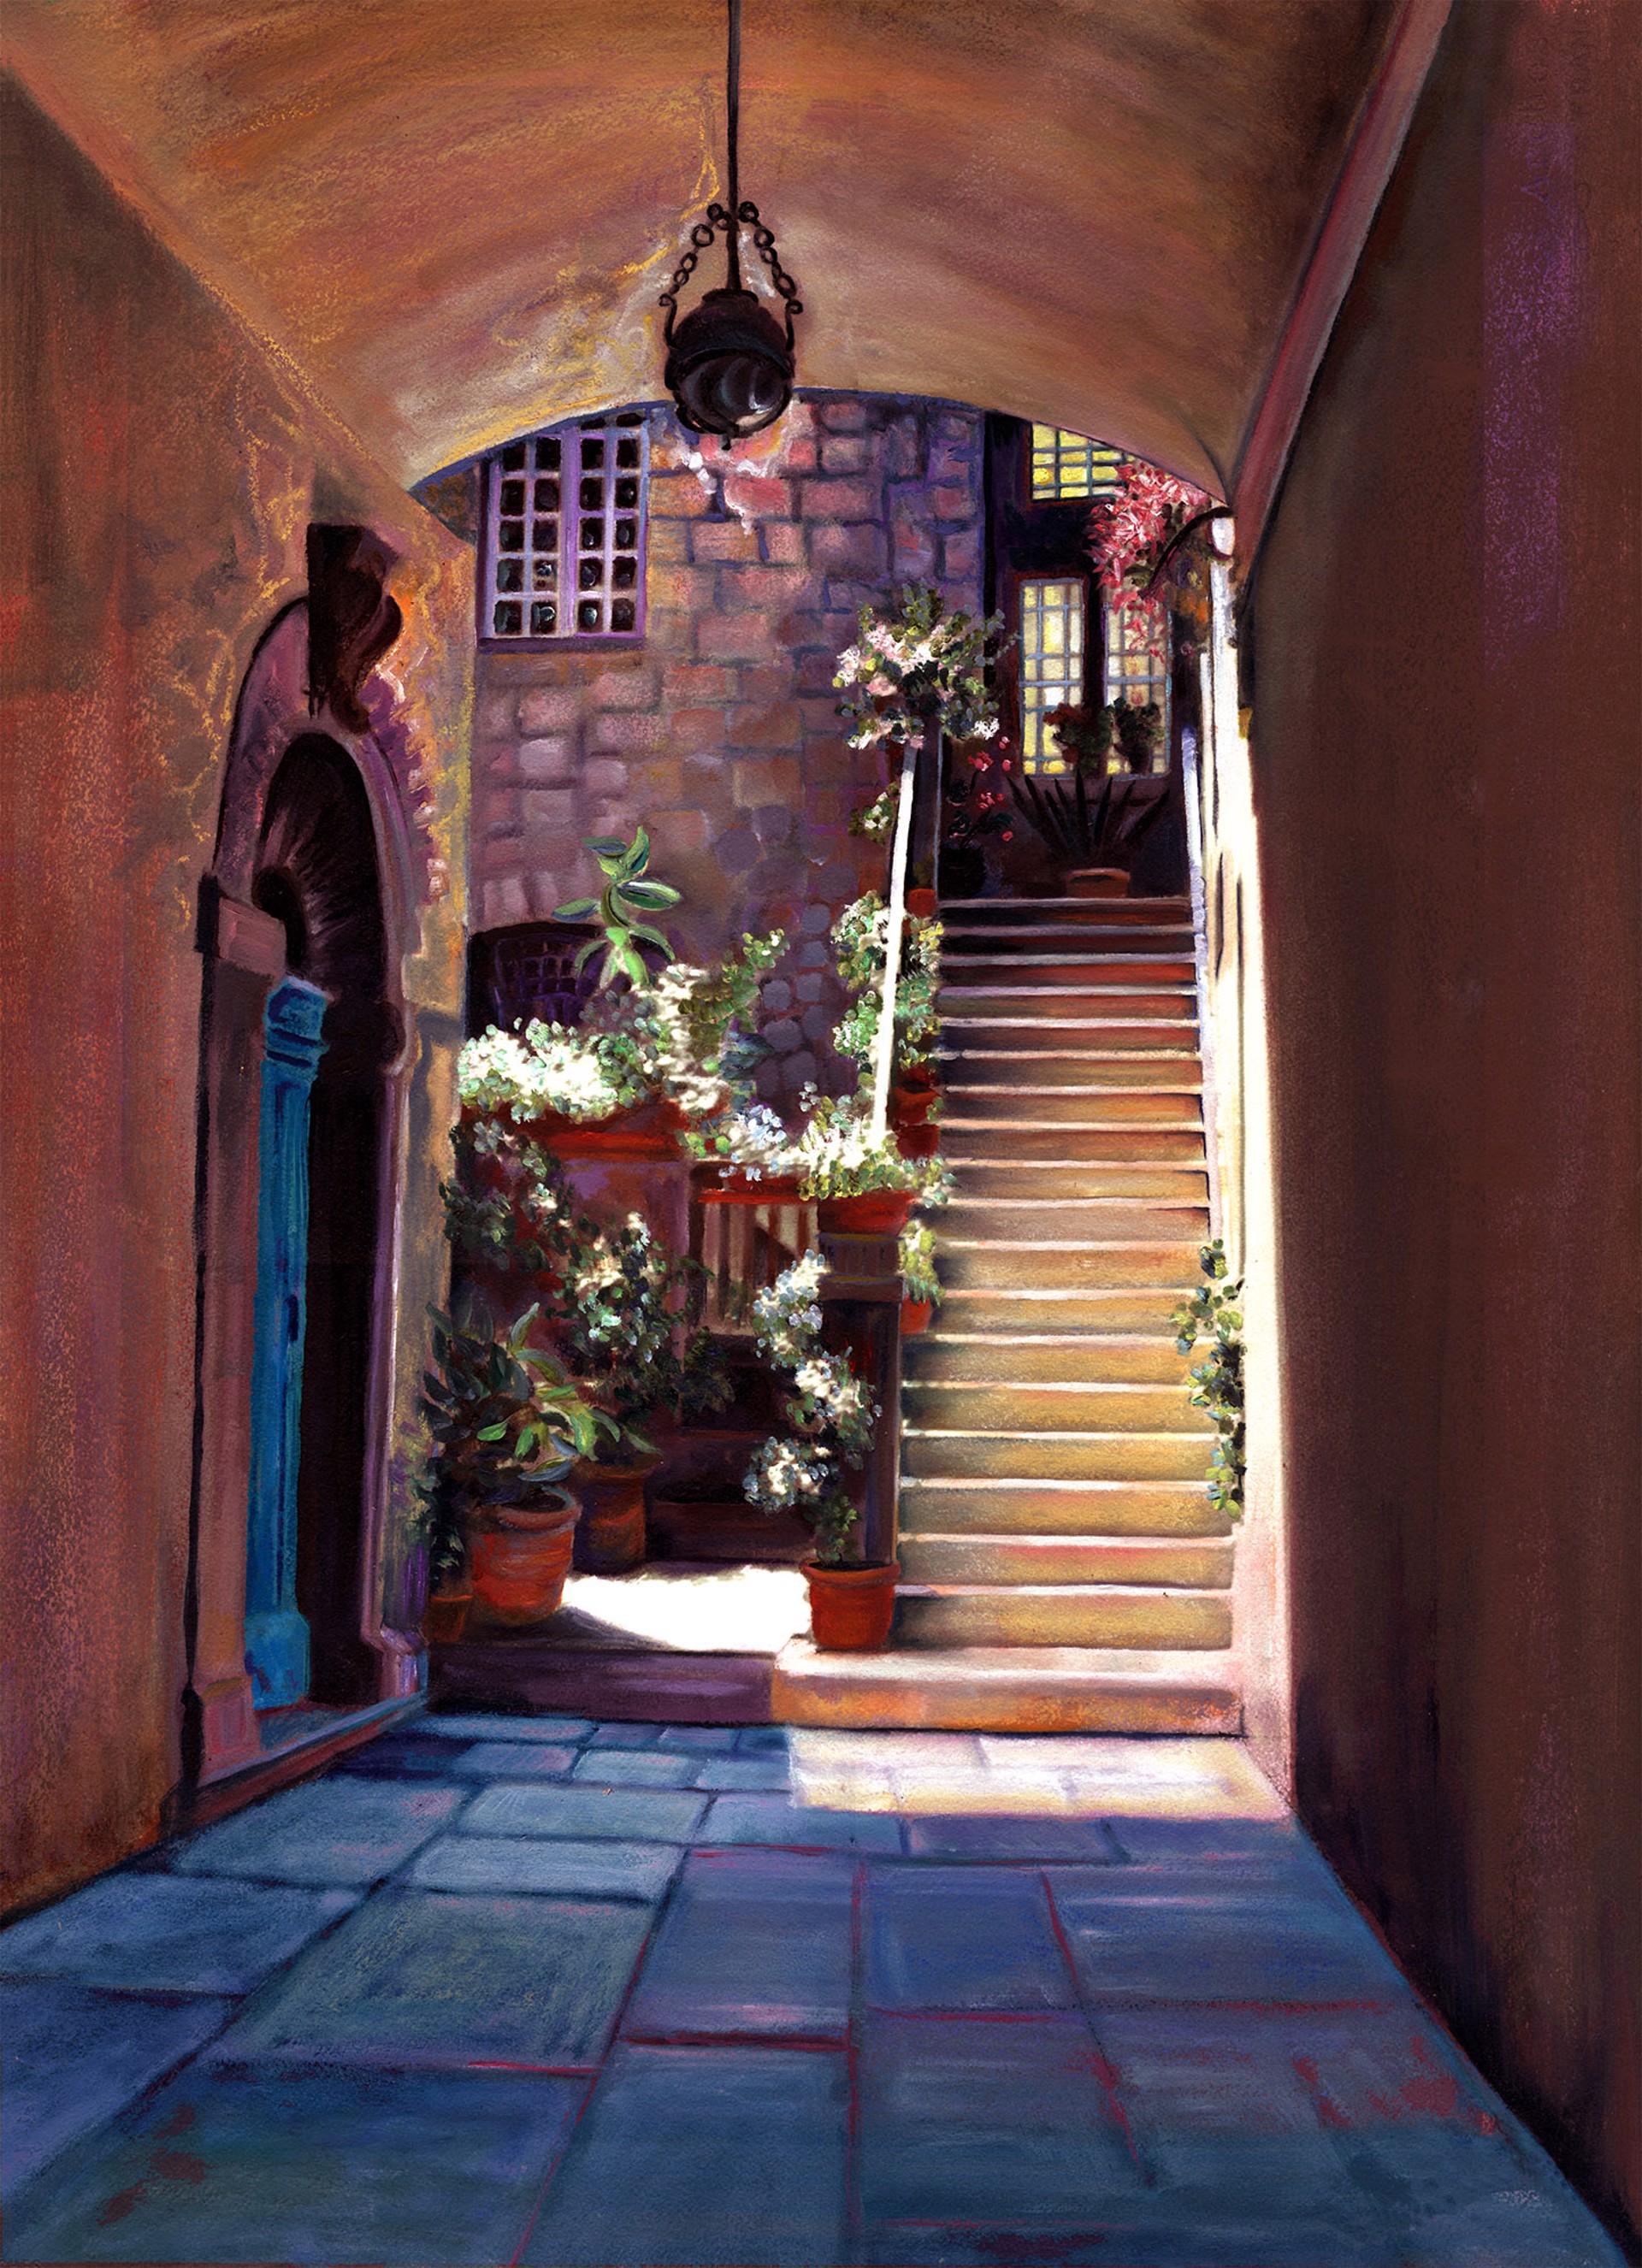 Courtyard, Florence by Bezalel Levy